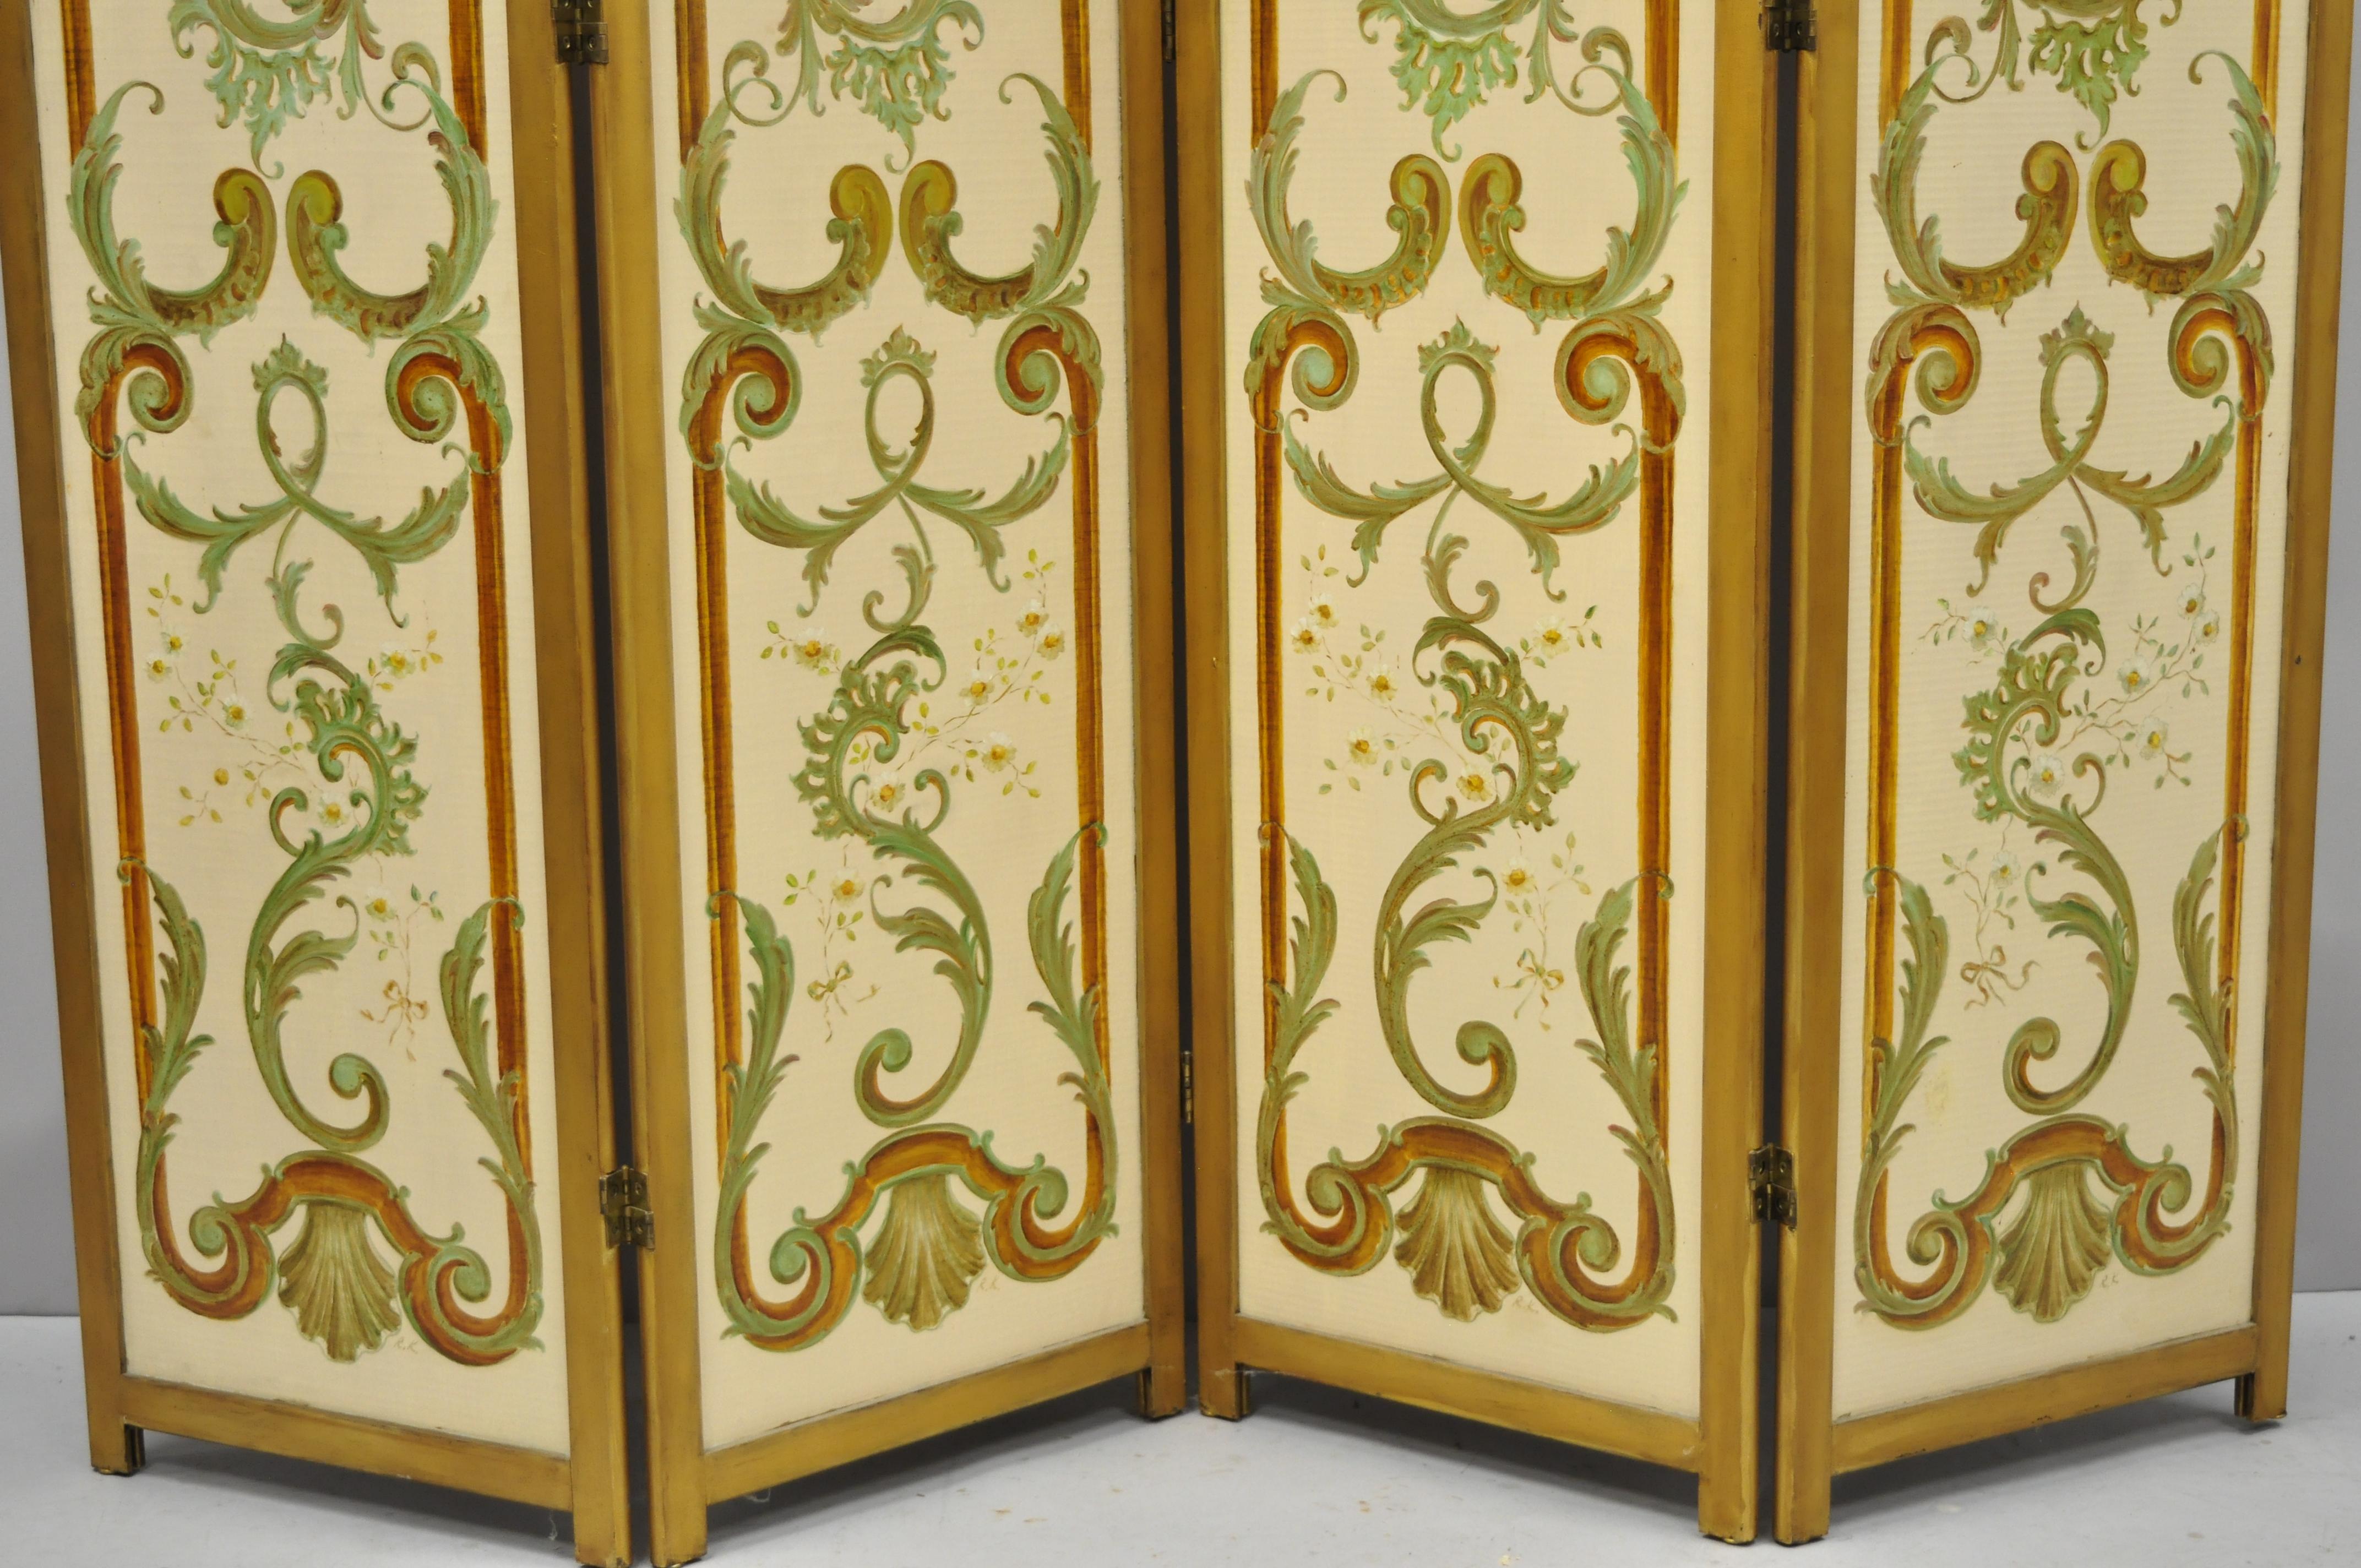 Four Panel Hand Painted French Cherub Putti Musical Dressing Screen Room Divider 1